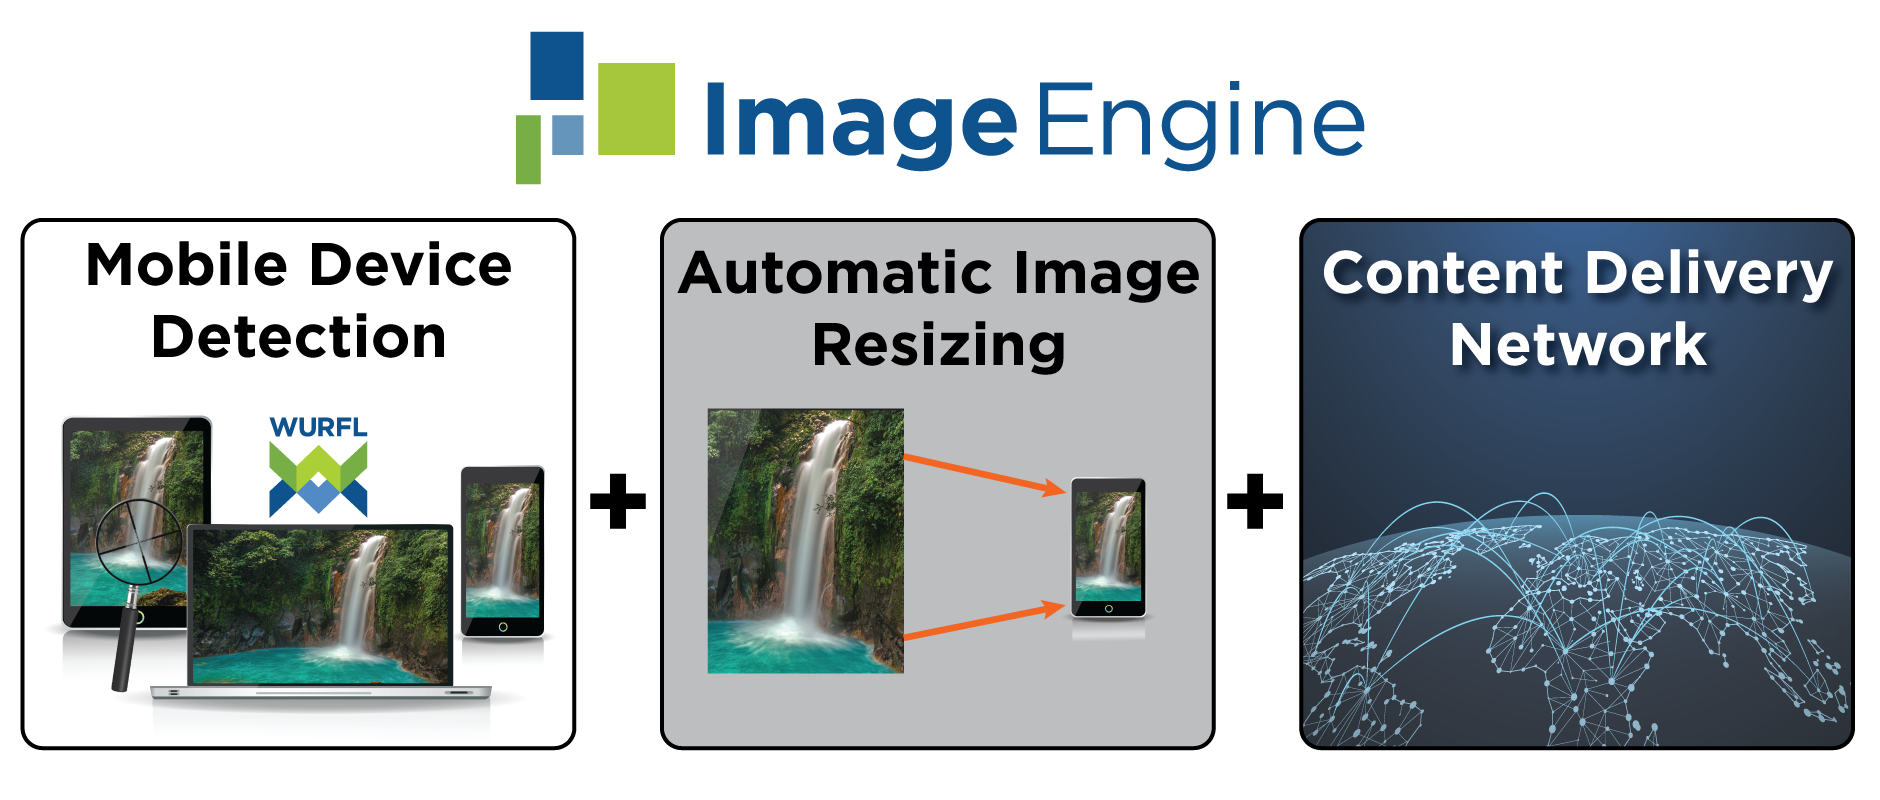 ImageEngine combines device detection + image resizing + CDN